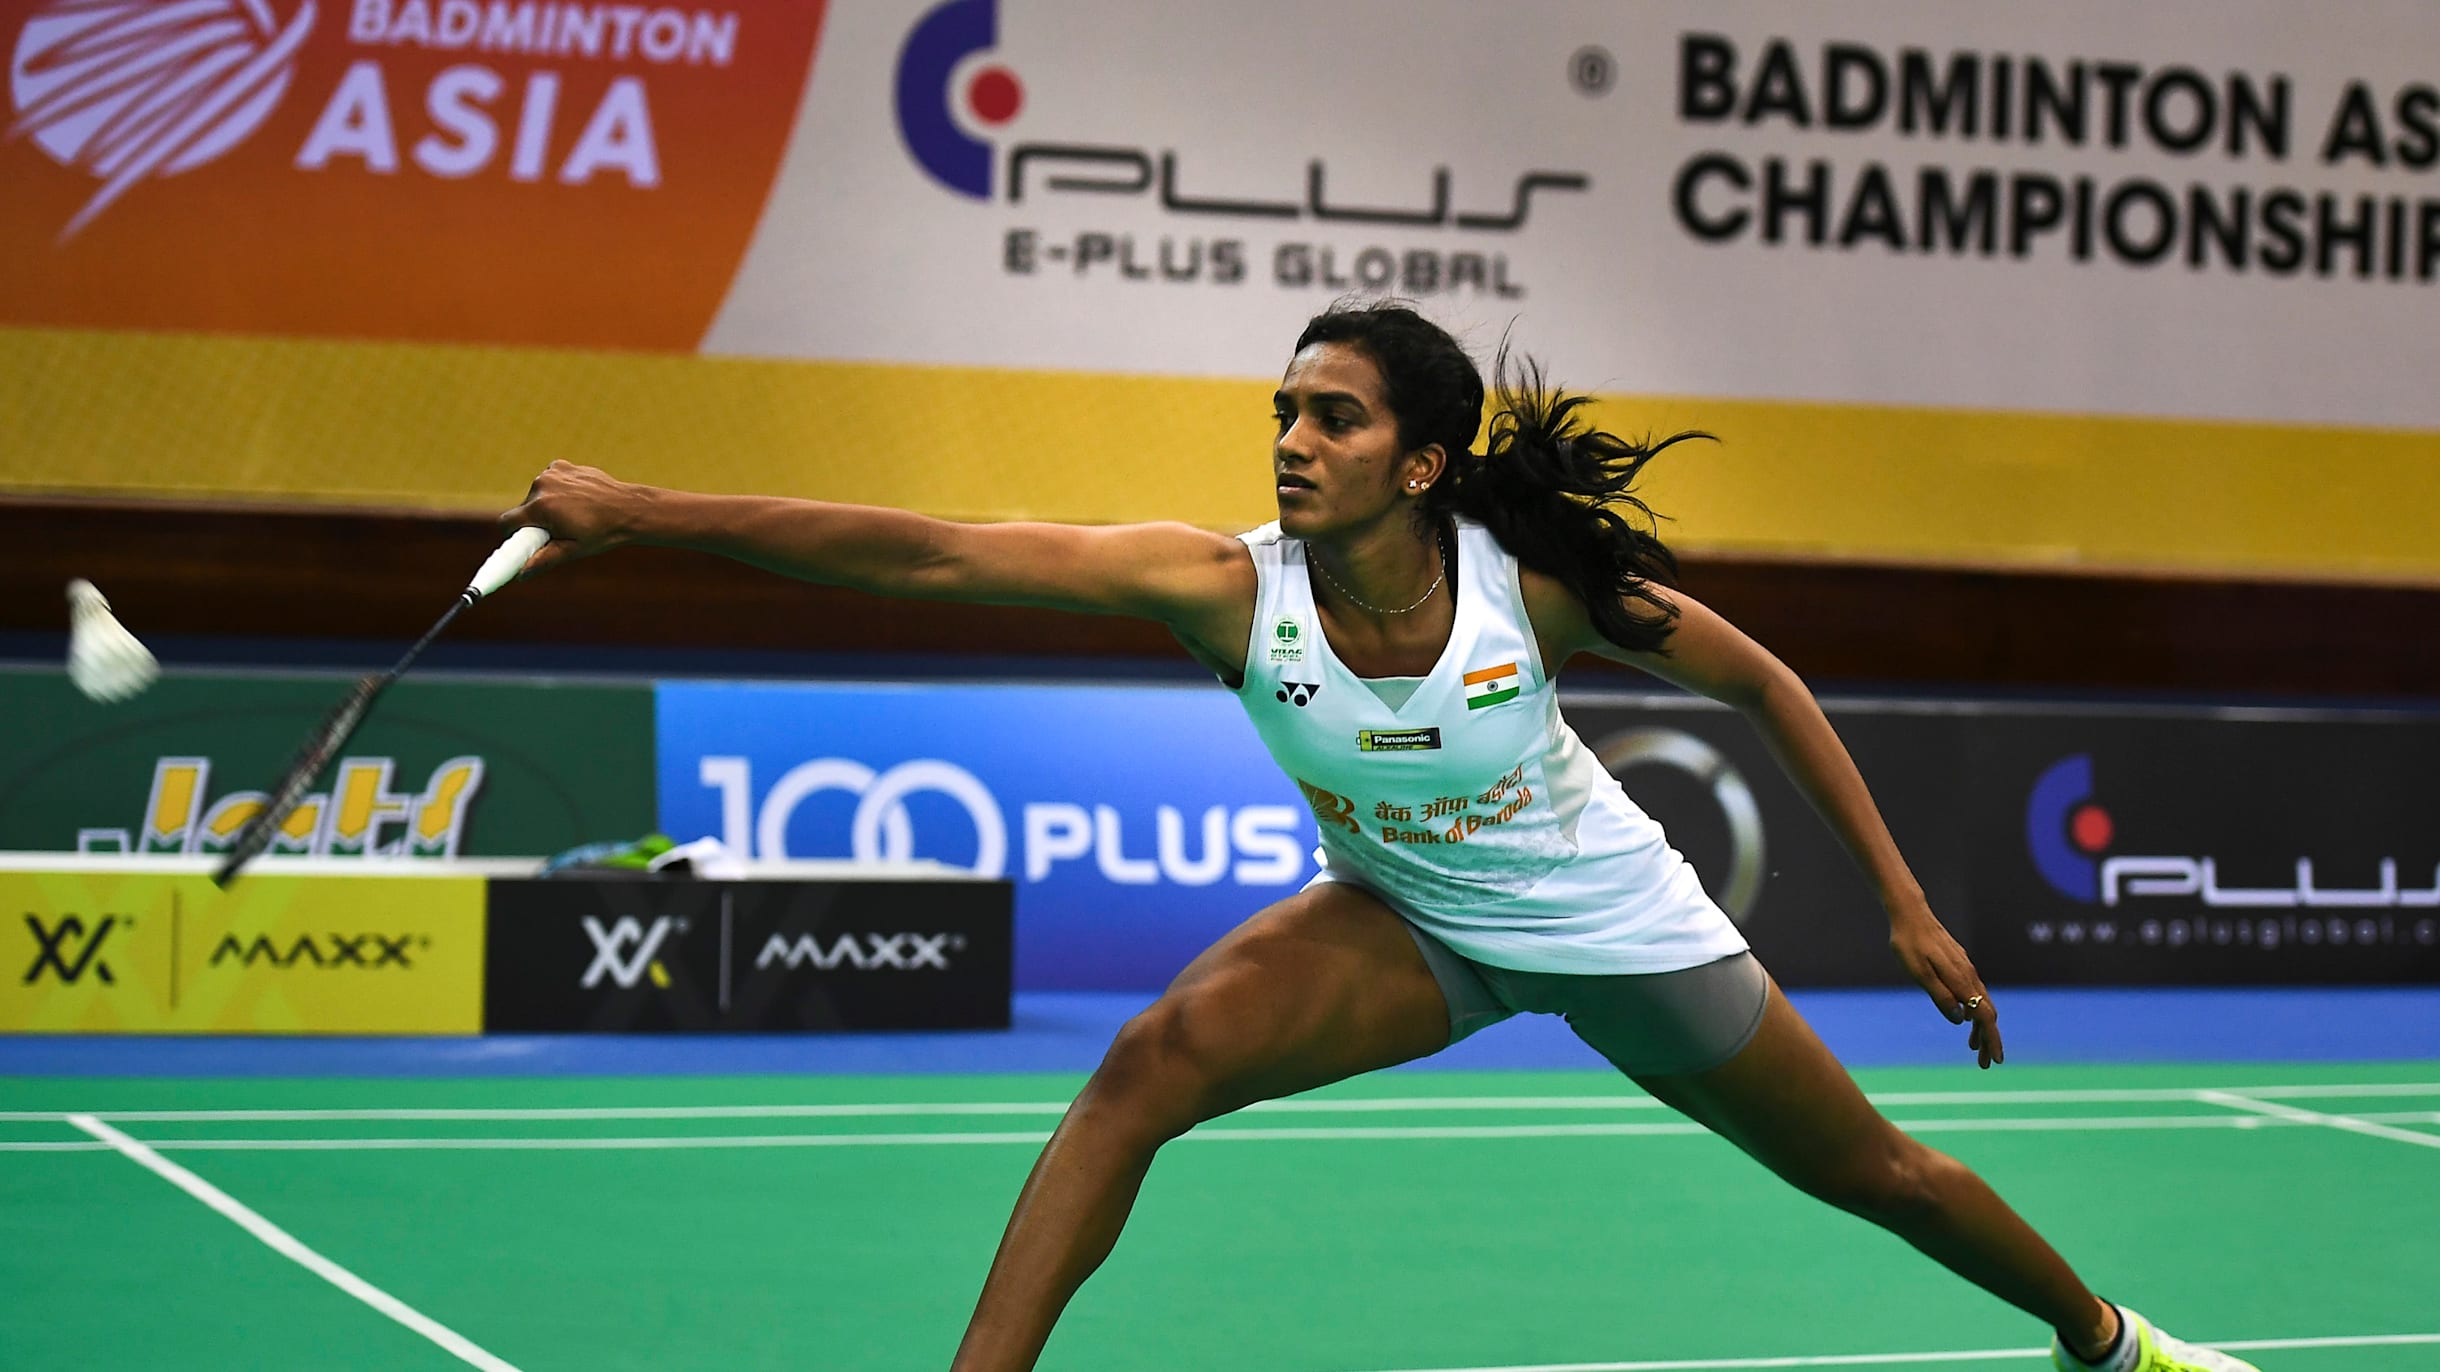 Swiss Open 2021 live Indias PV Sindhu, Kidambi Srikanth out to seize day 3, get live match updates